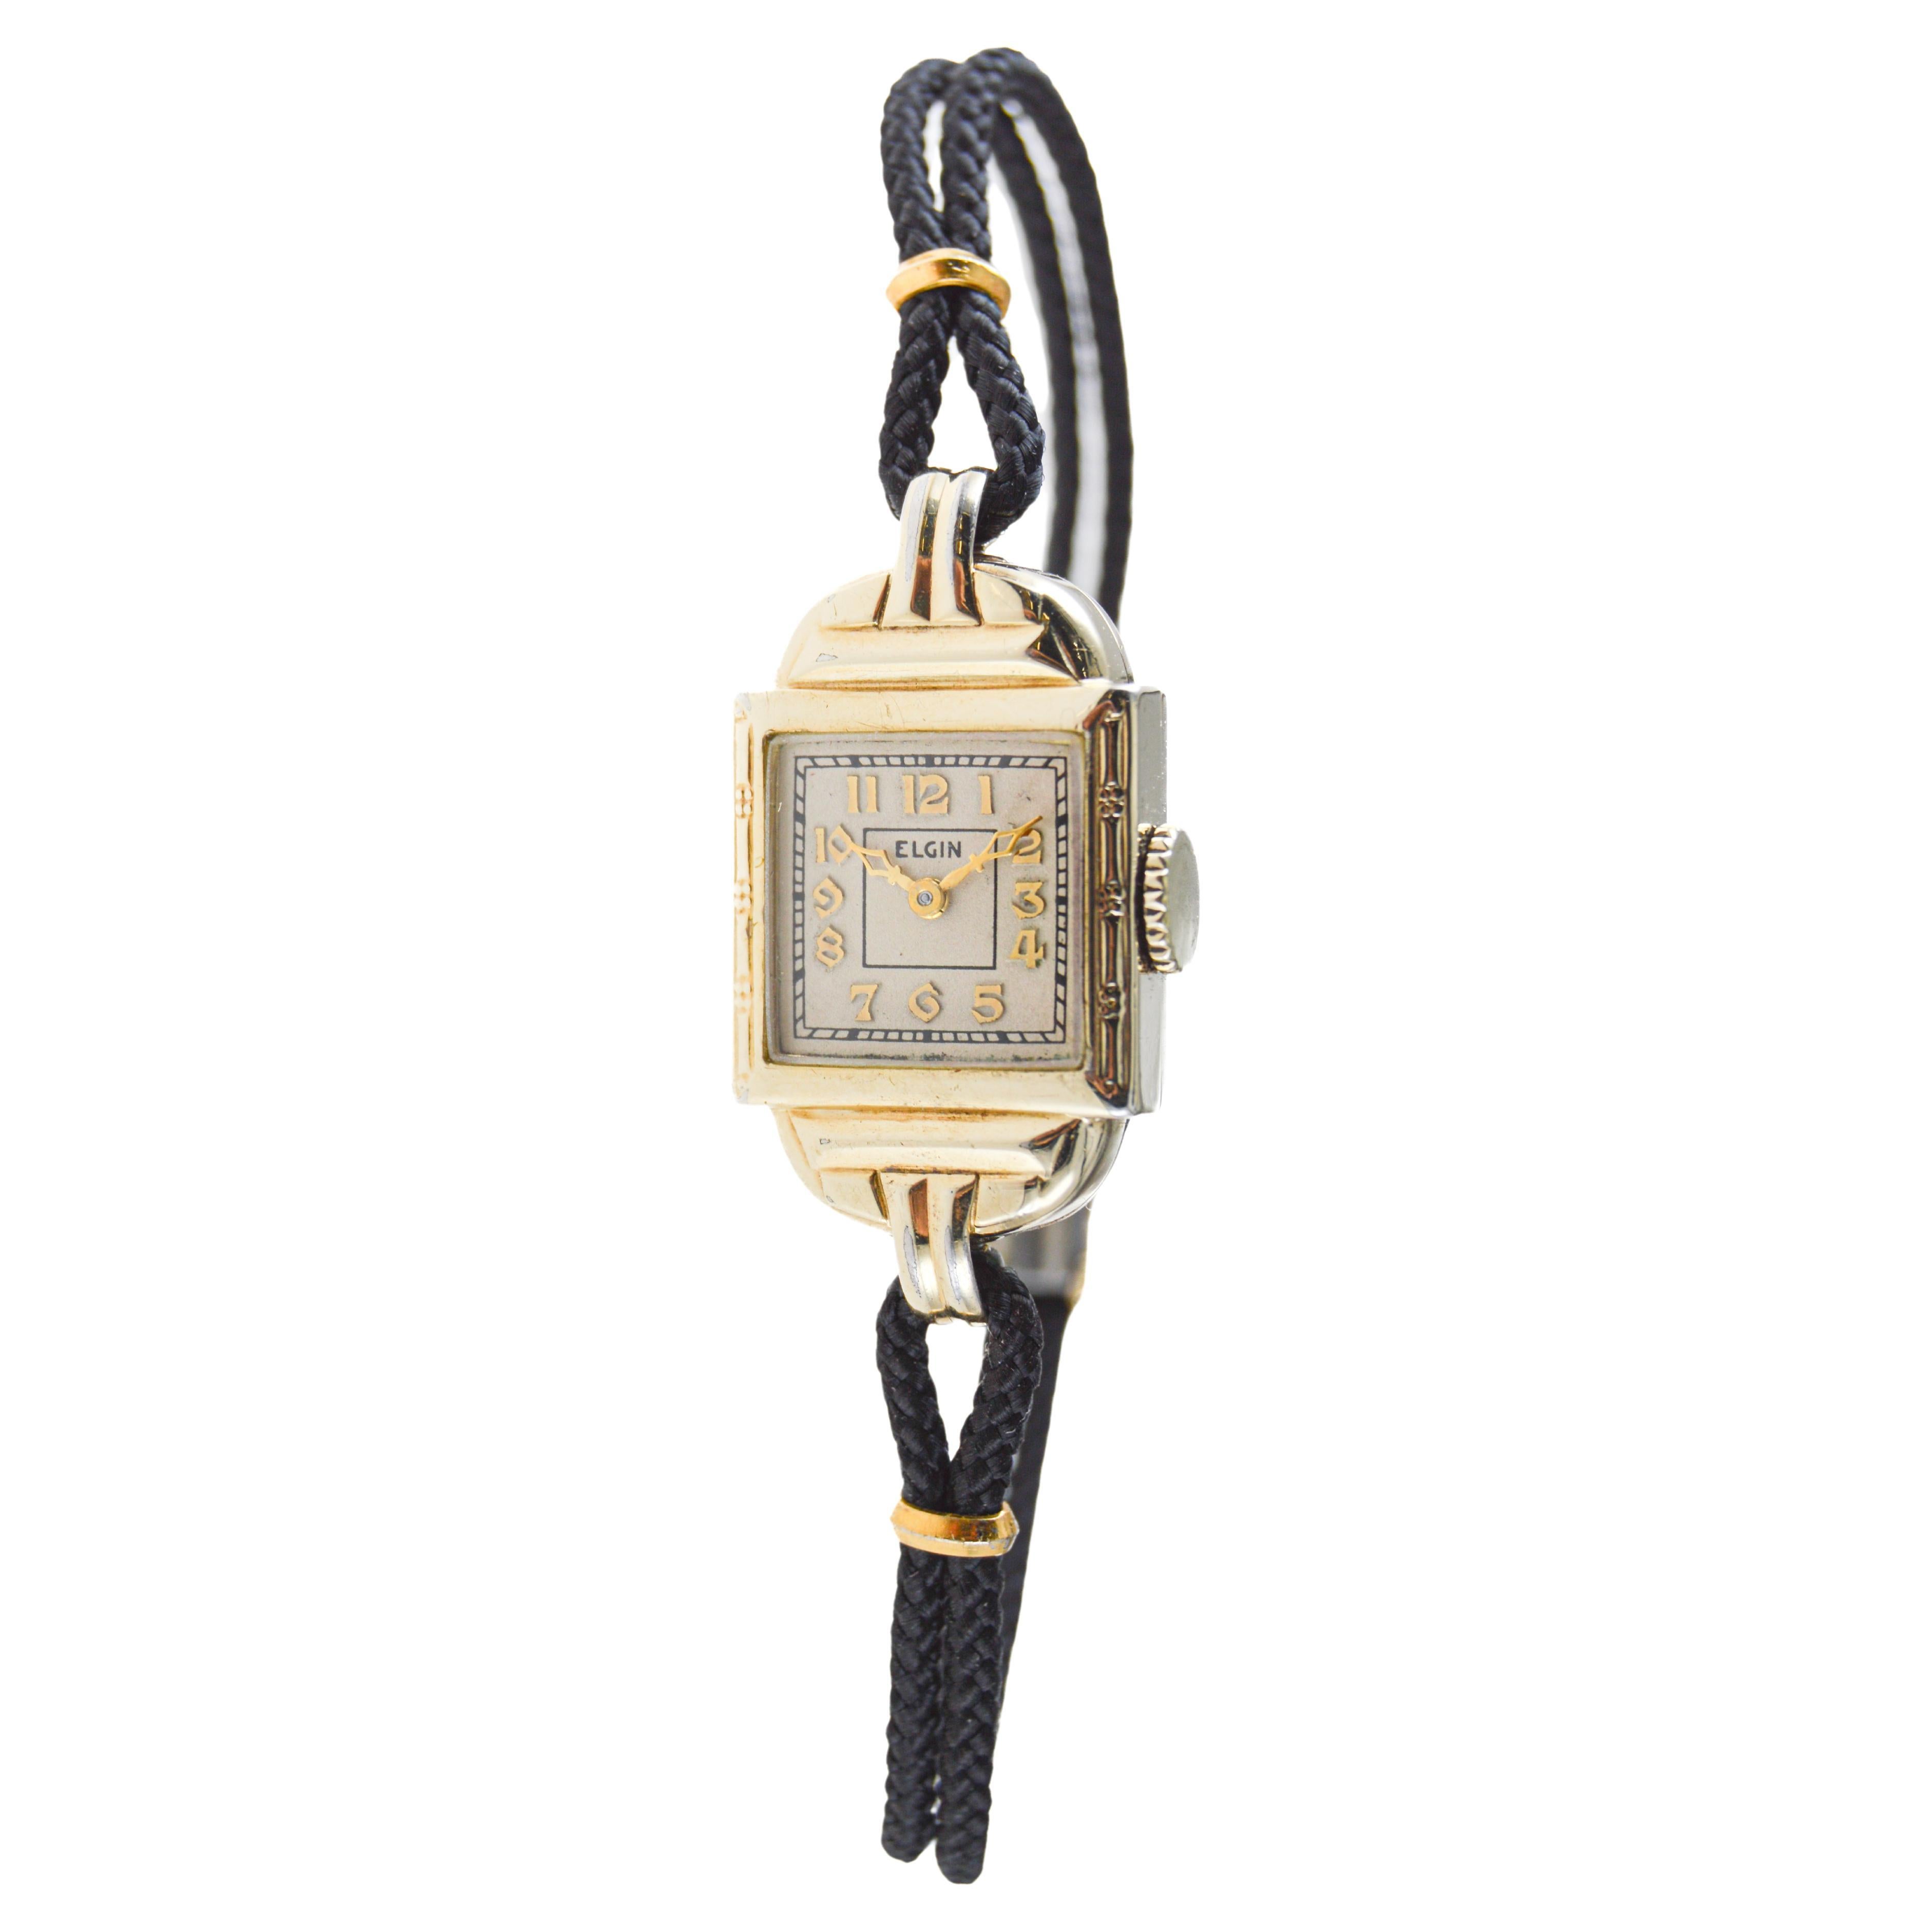  Elgin Gold Filled Art Deco Ladies Wrist Watch circa, 1930's with Original Dial  For Sale 2